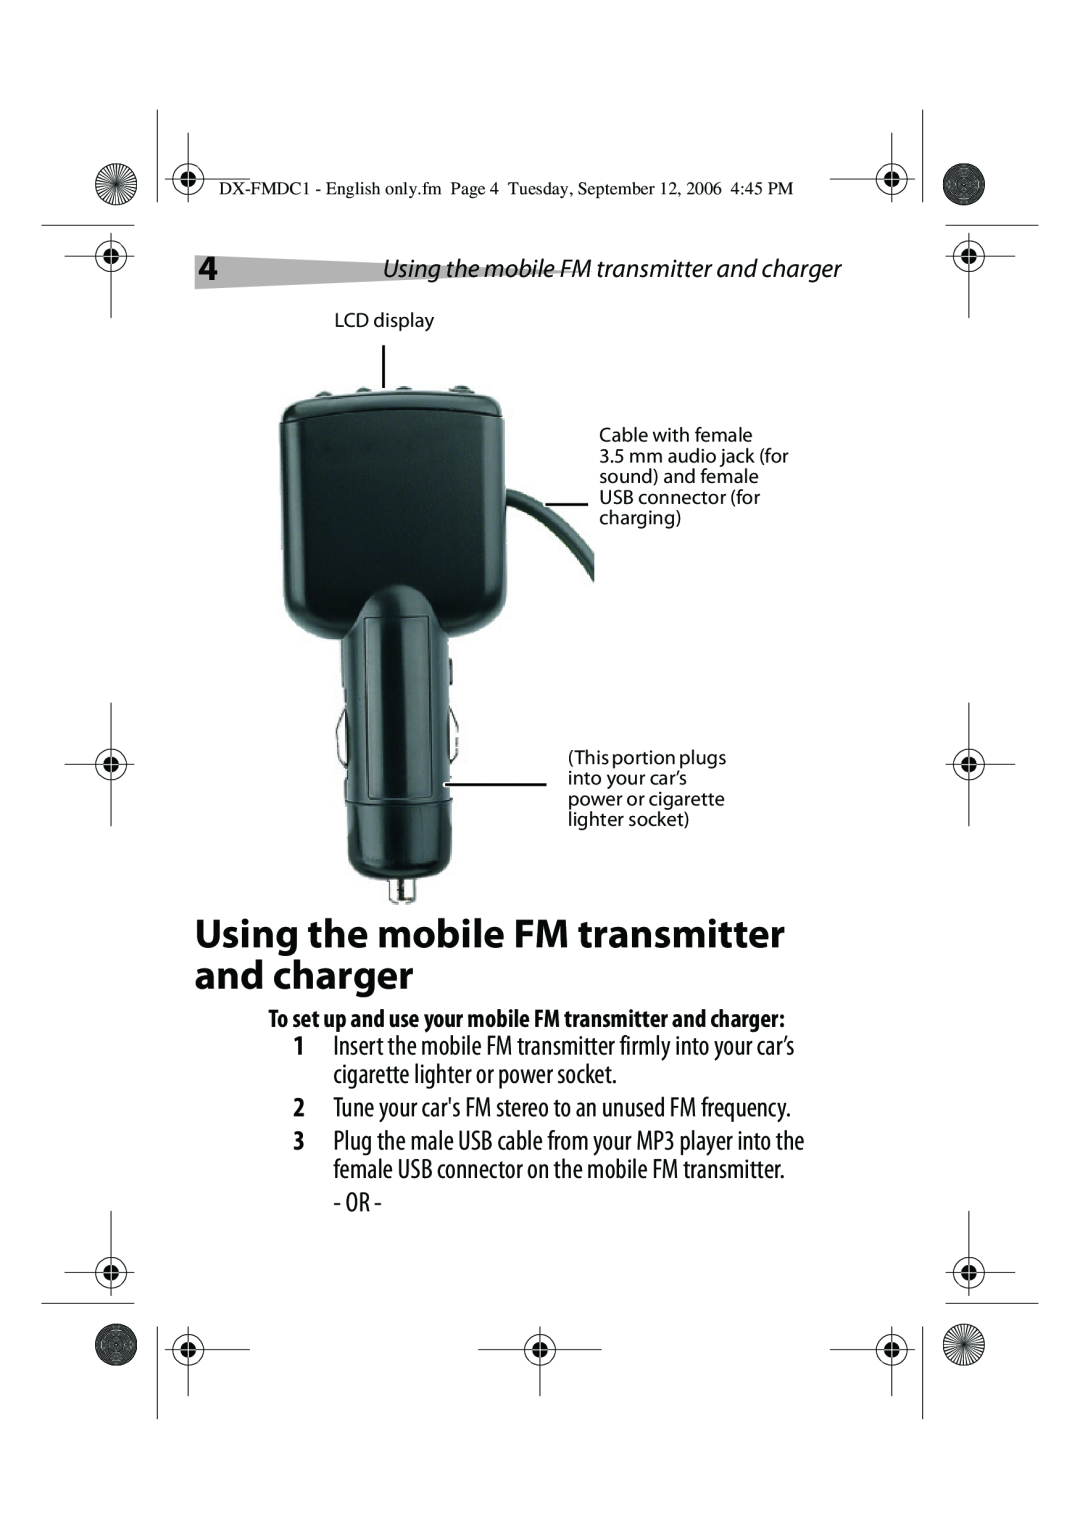 Dynex DX-FMDC1 manual Using the mobile FM transmitter and charger, LCD display, Cable with female 